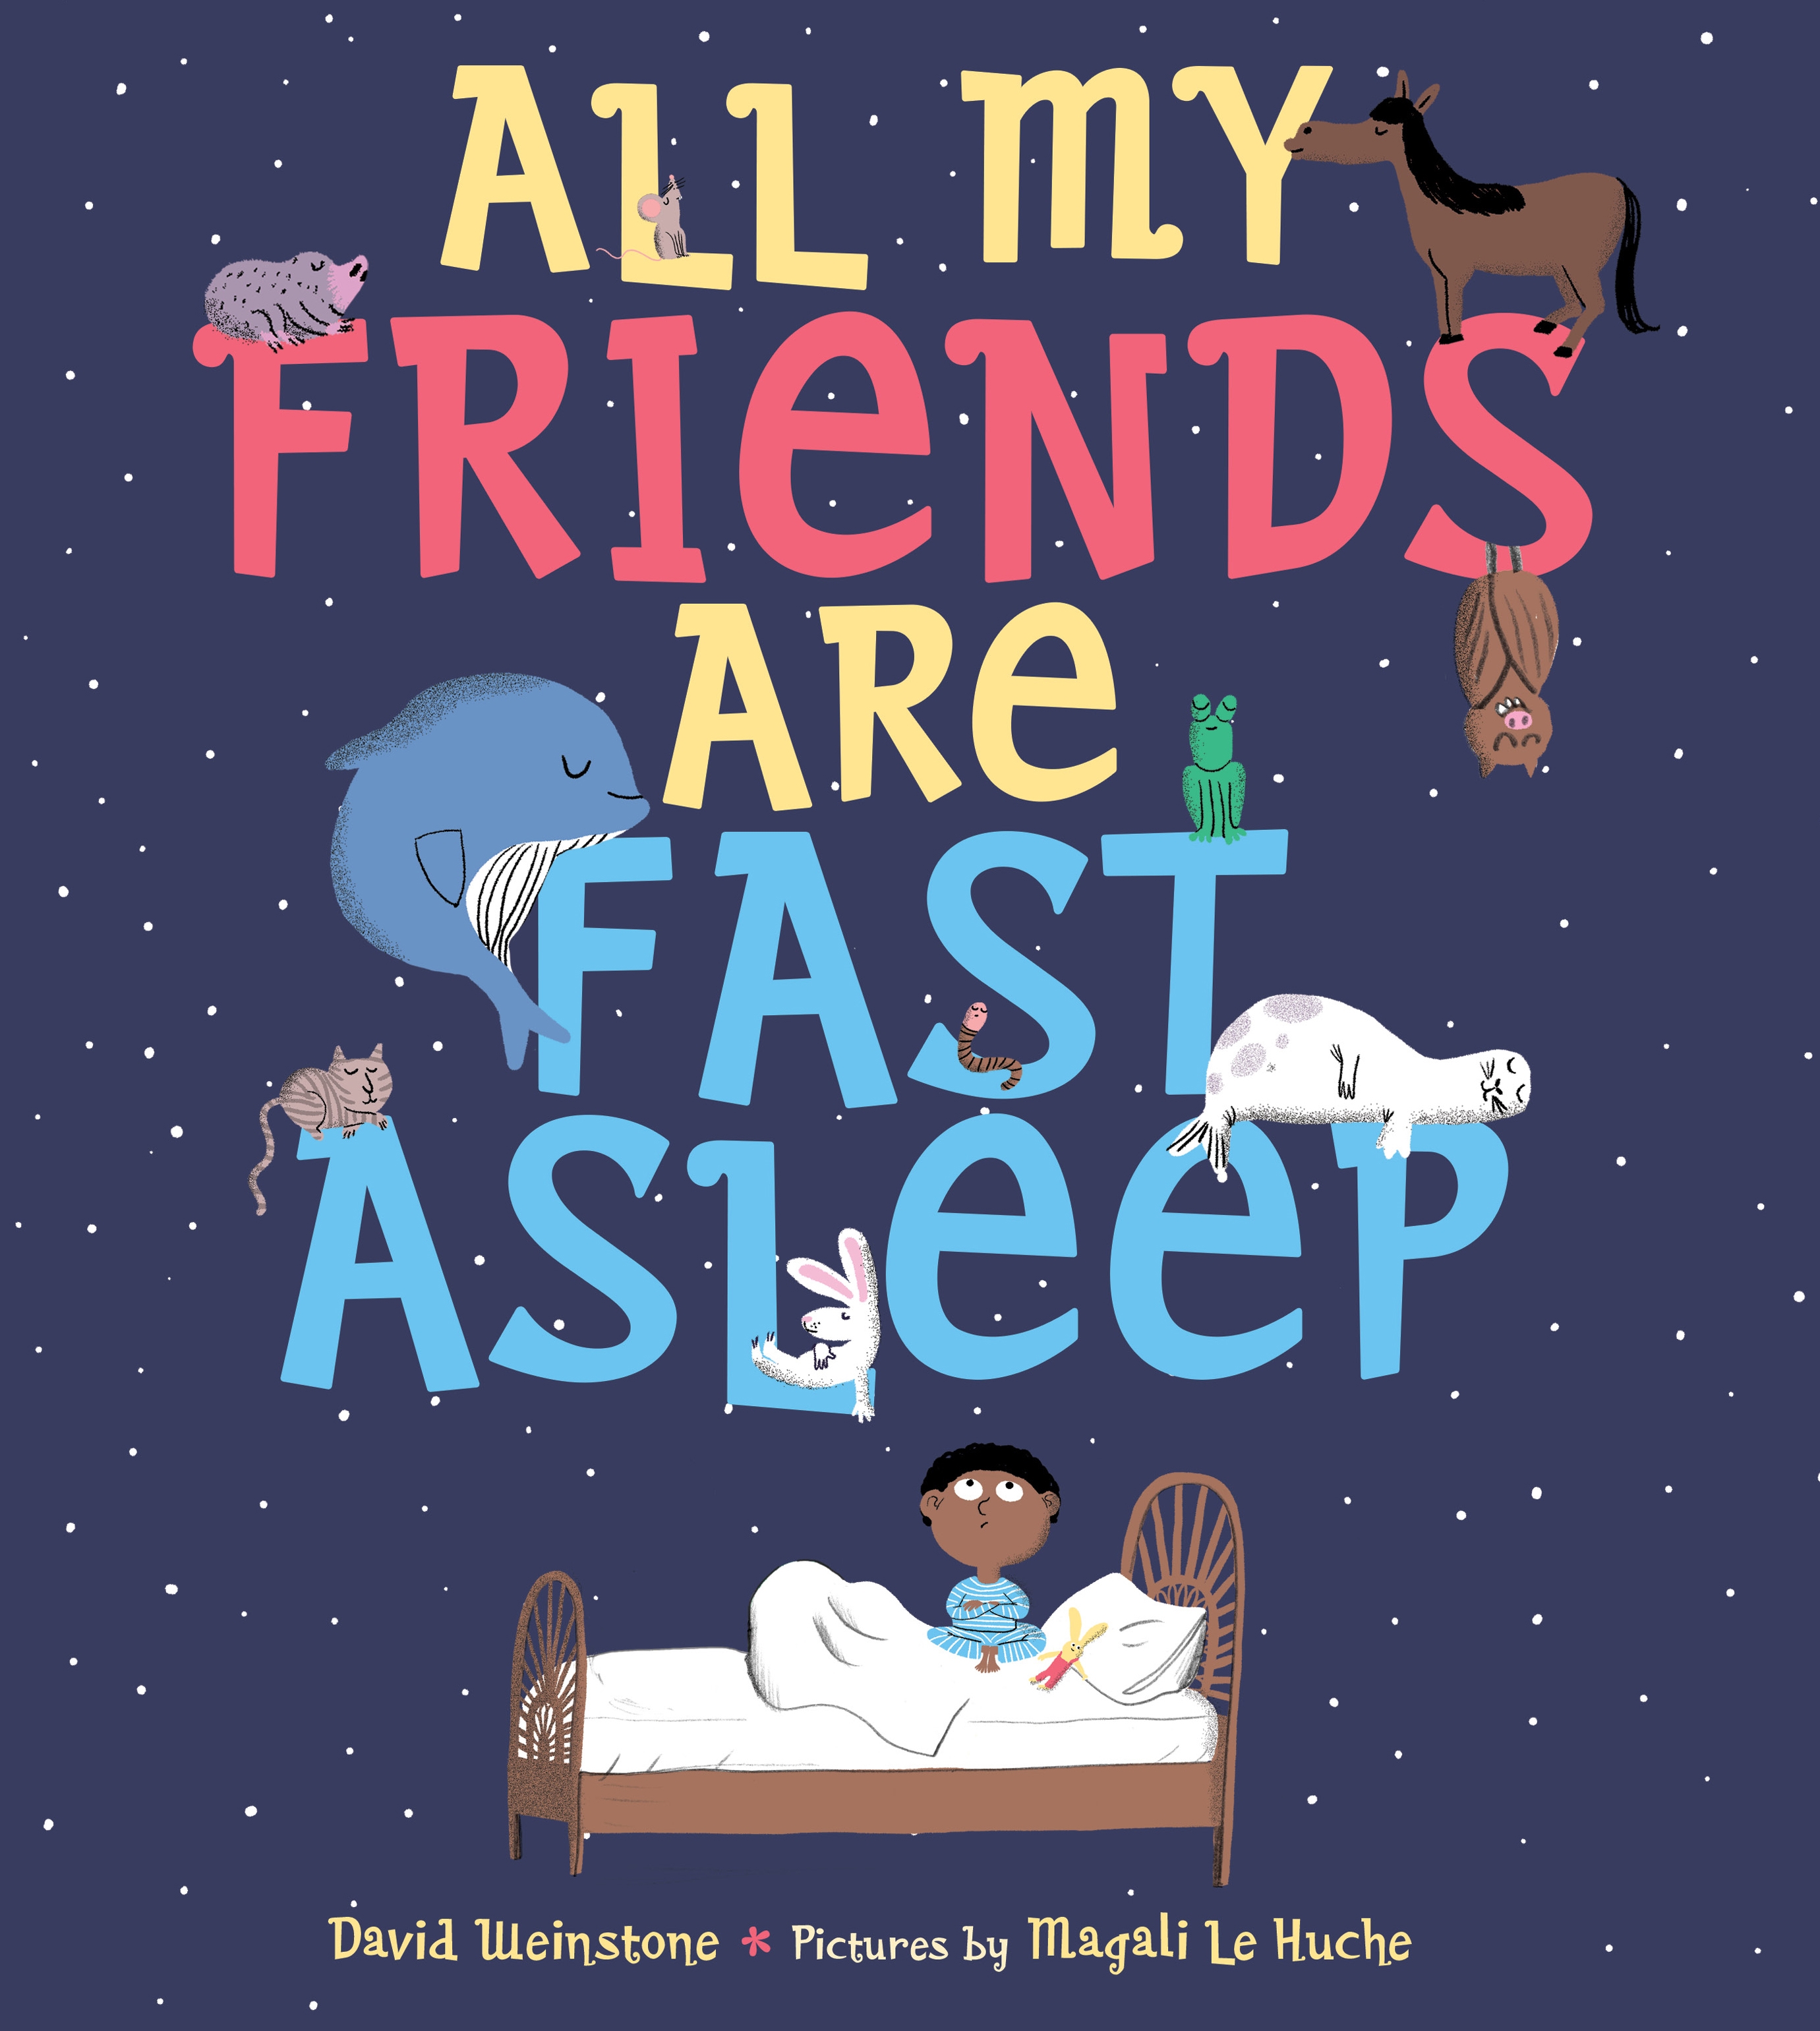 Sunday Story Time with David Weinstone (Author of All My Friends Are Fast Asleep)